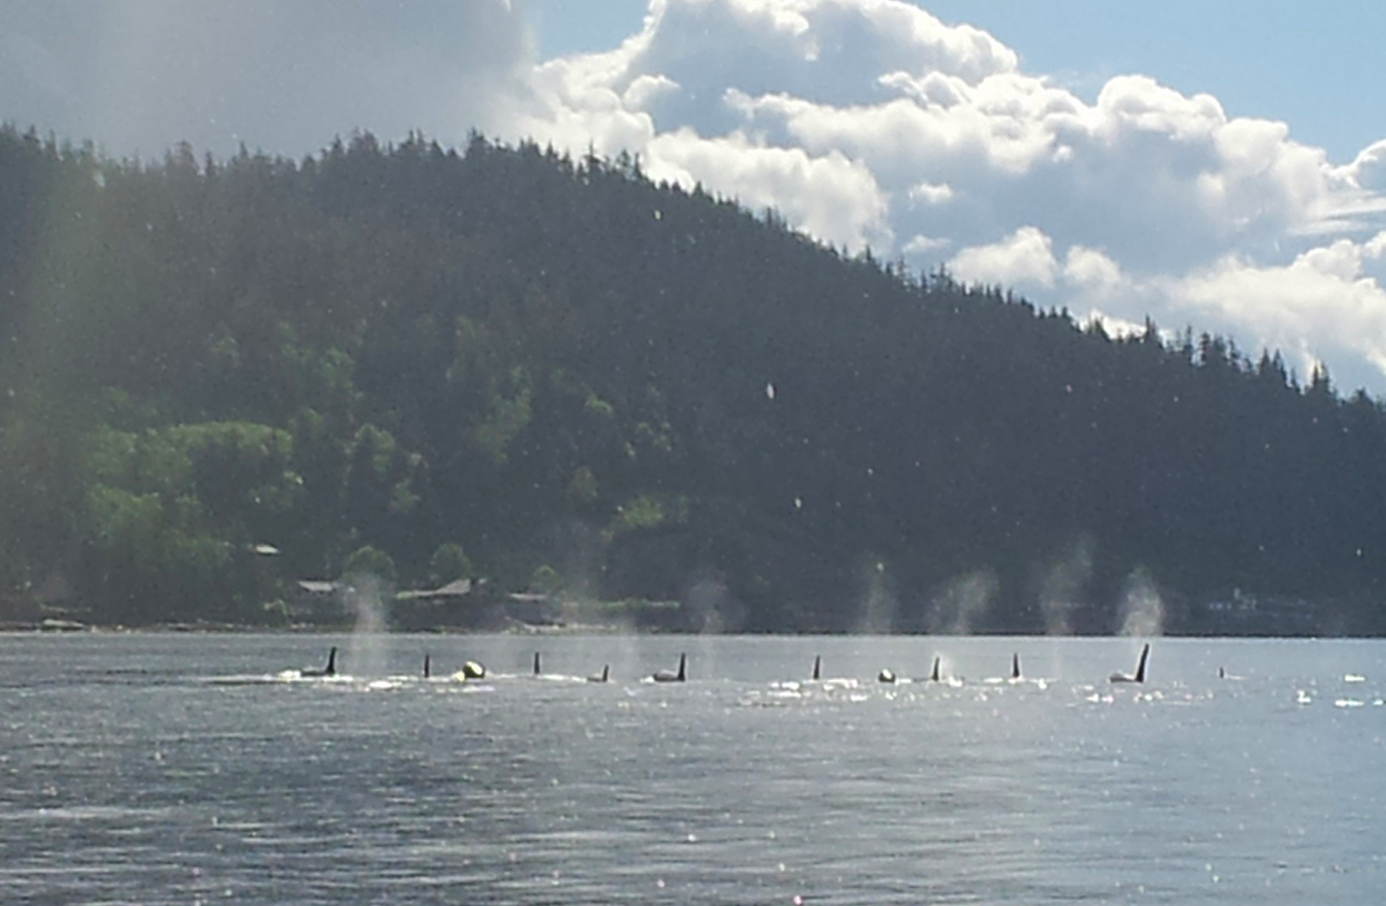  Orcas love June in Ketchikan! We spotted this group on the boat ride to Orcas Cove in June 2014. 